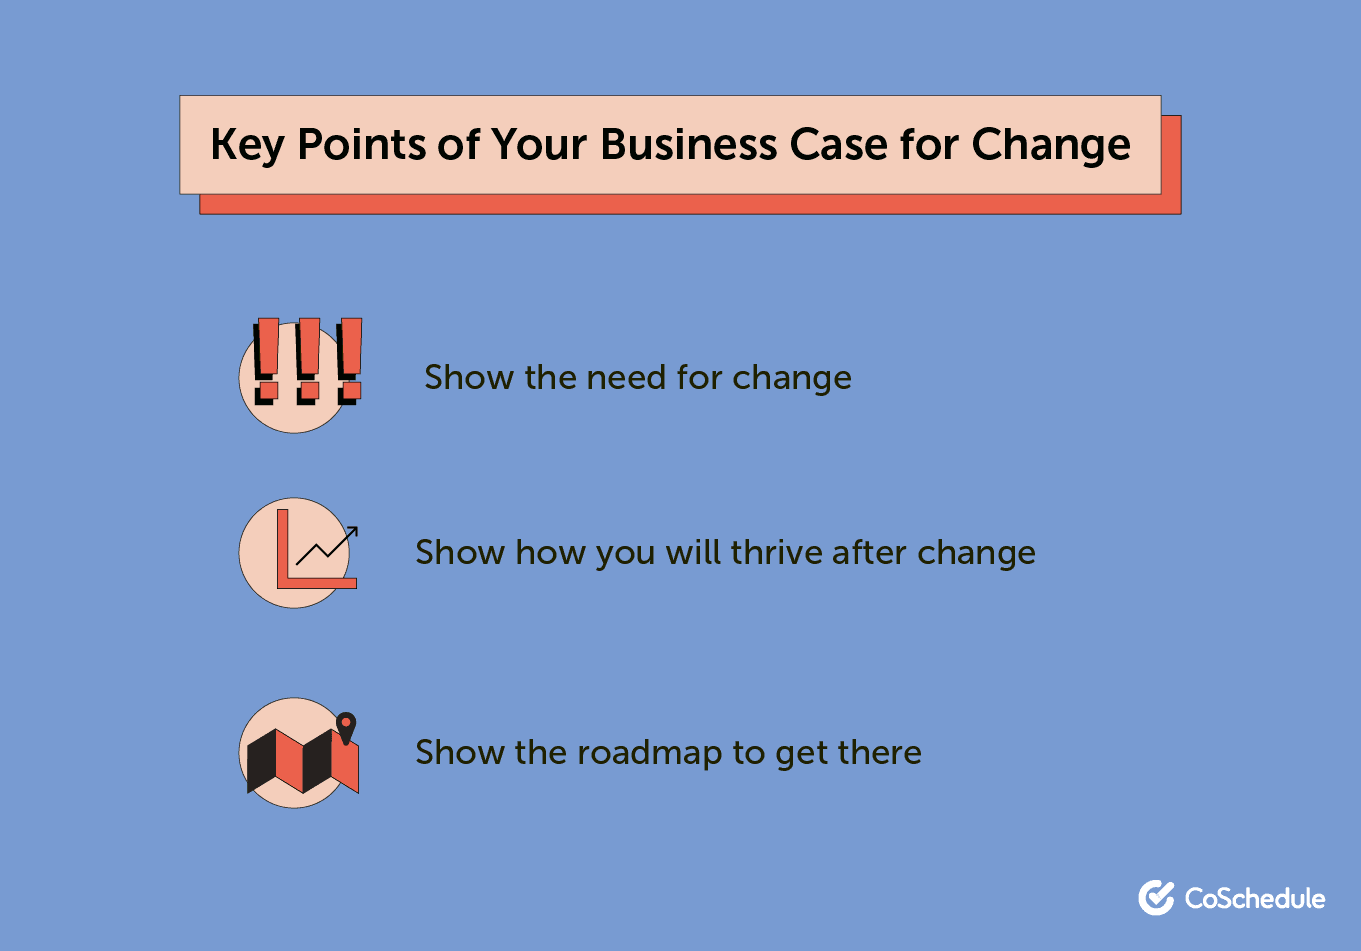 Key points of your business case for change